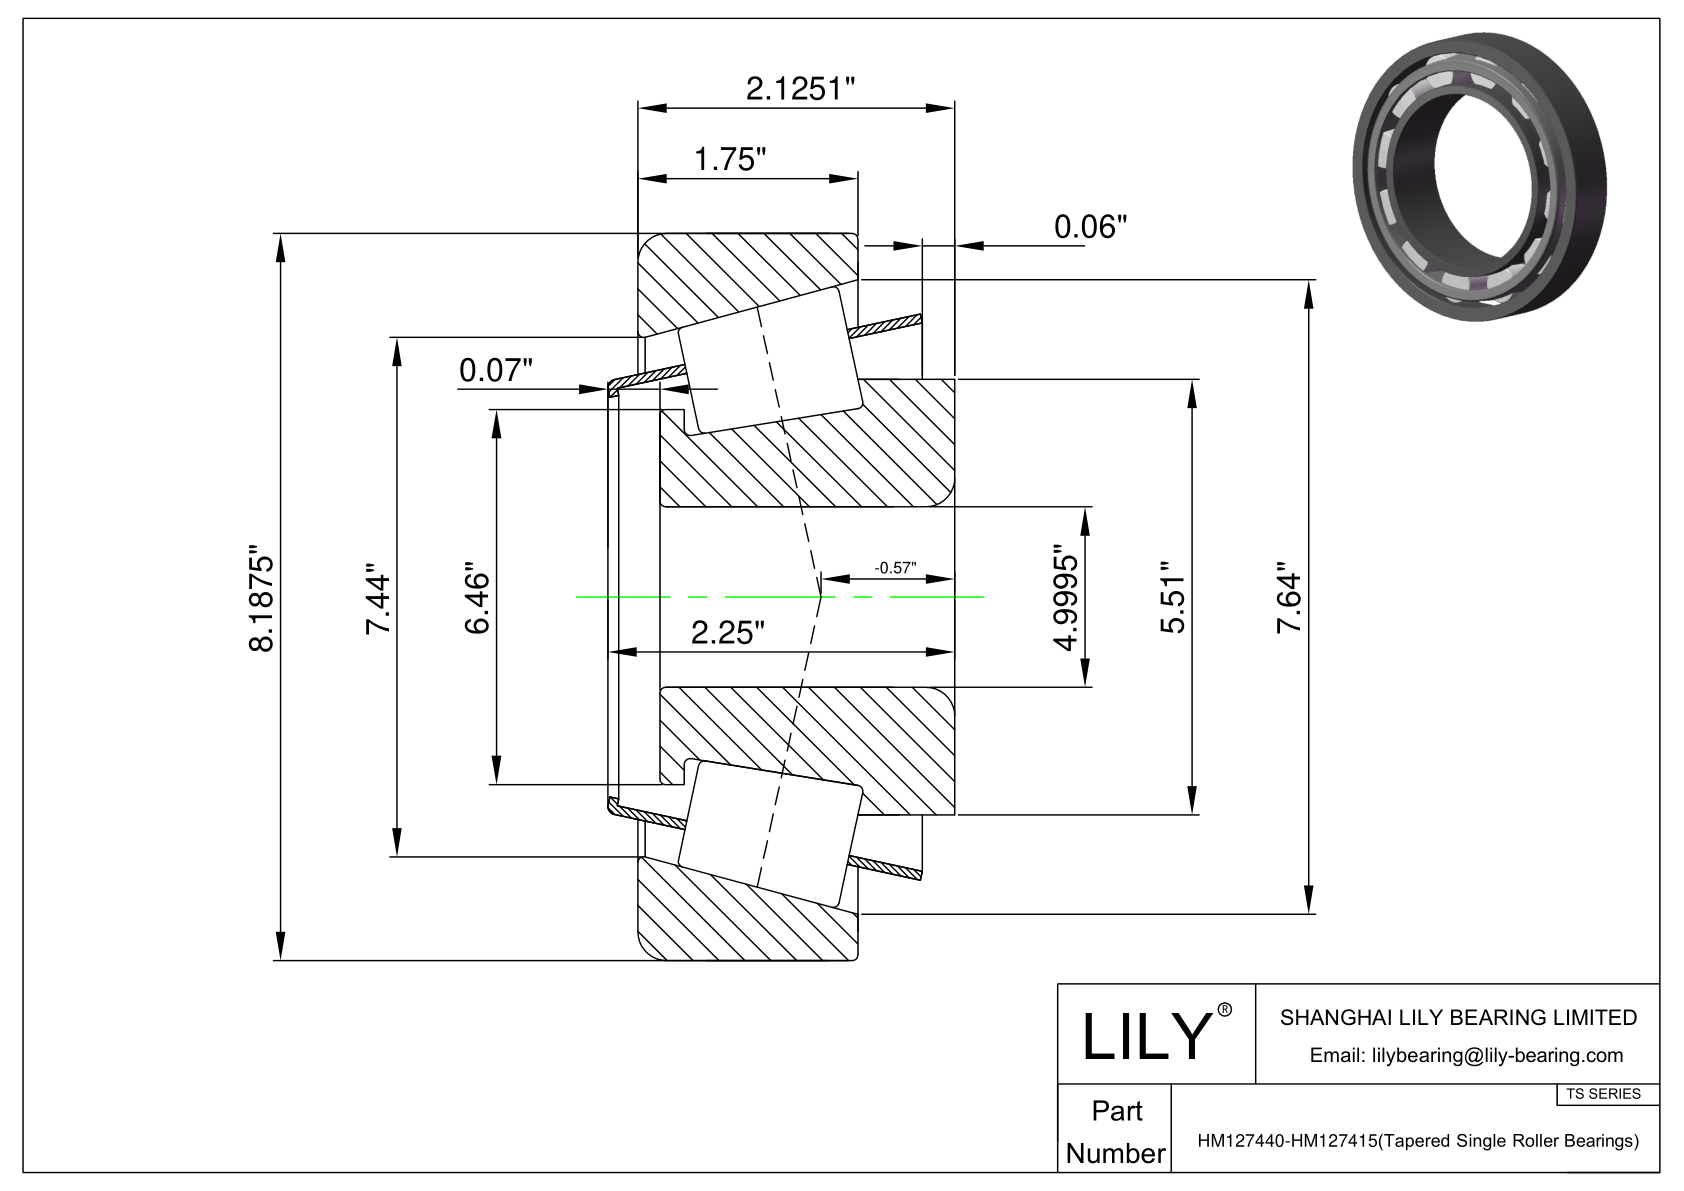 HM127440-HM127415 TS (Tapered Single Roller Bearings) (Imperial) cad drawing